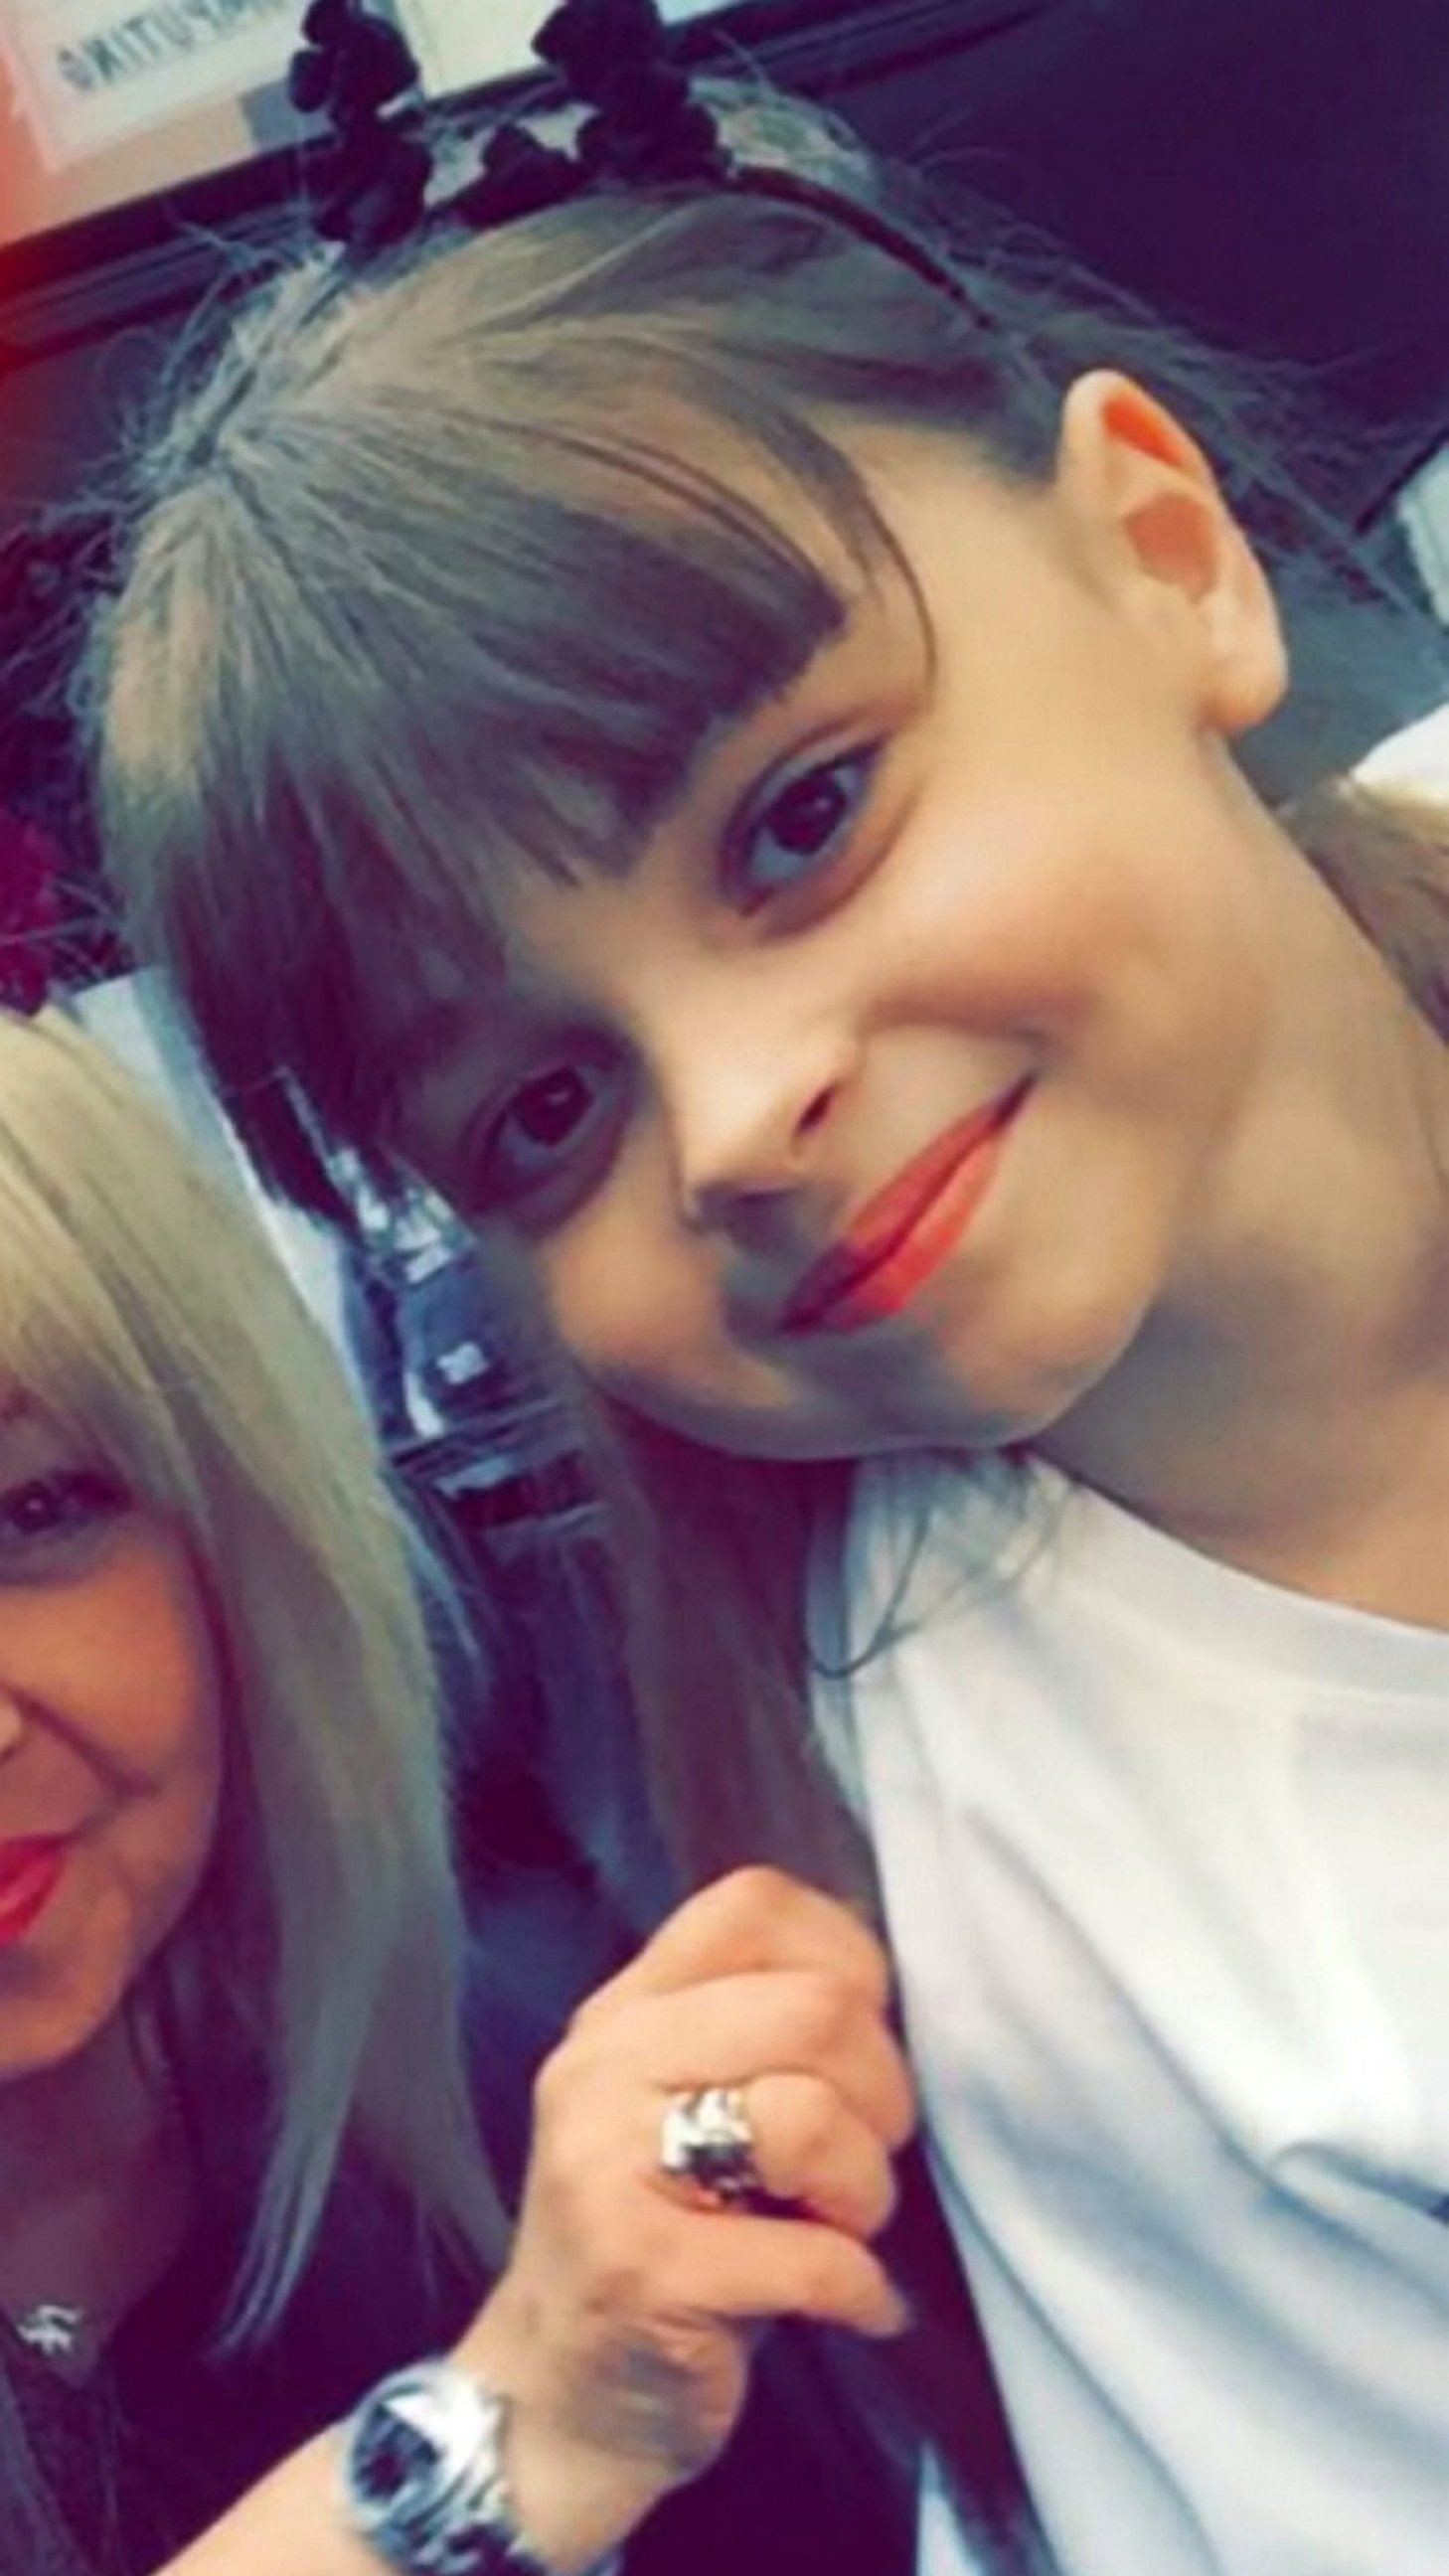 PHOTO: An undated photo of 8-year-old Saffie Roussos; she died in the Manchester, England, attack on May 22, 2017.